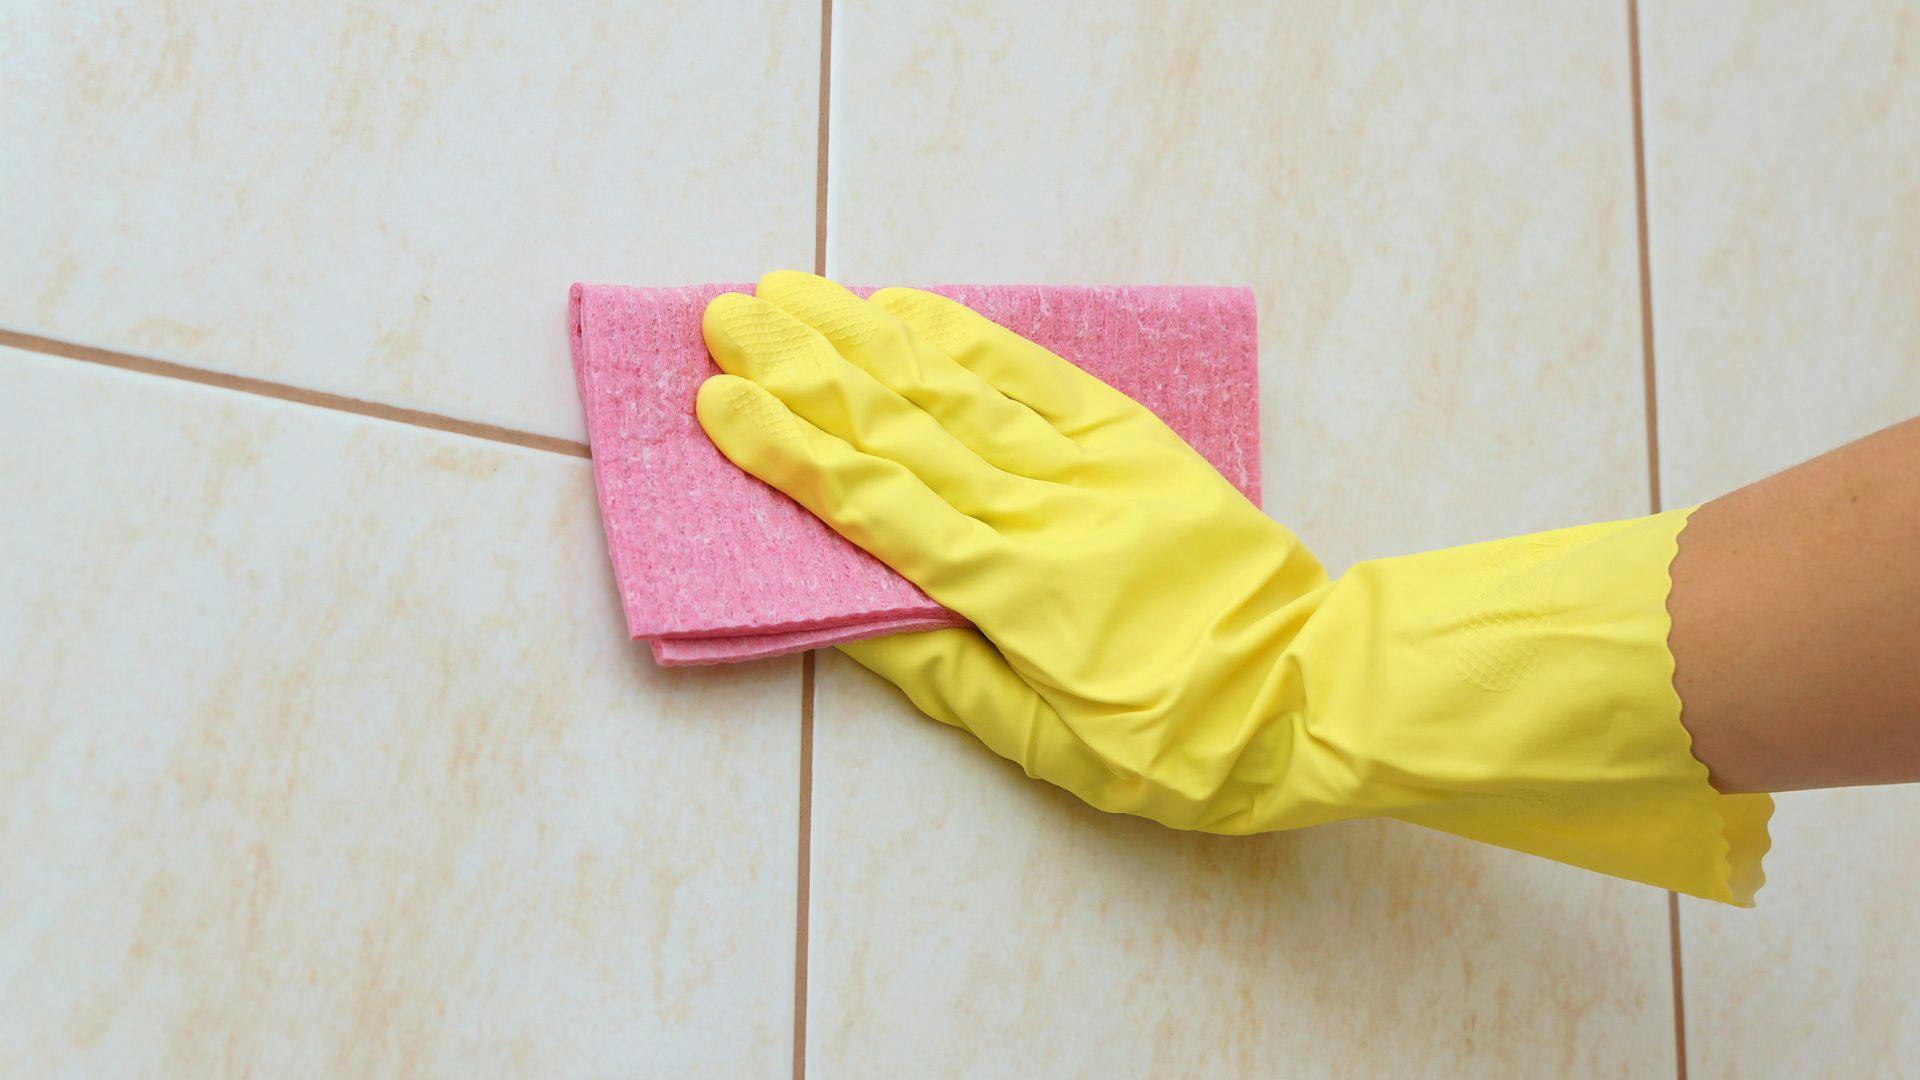 Gloved hand cleaning tile